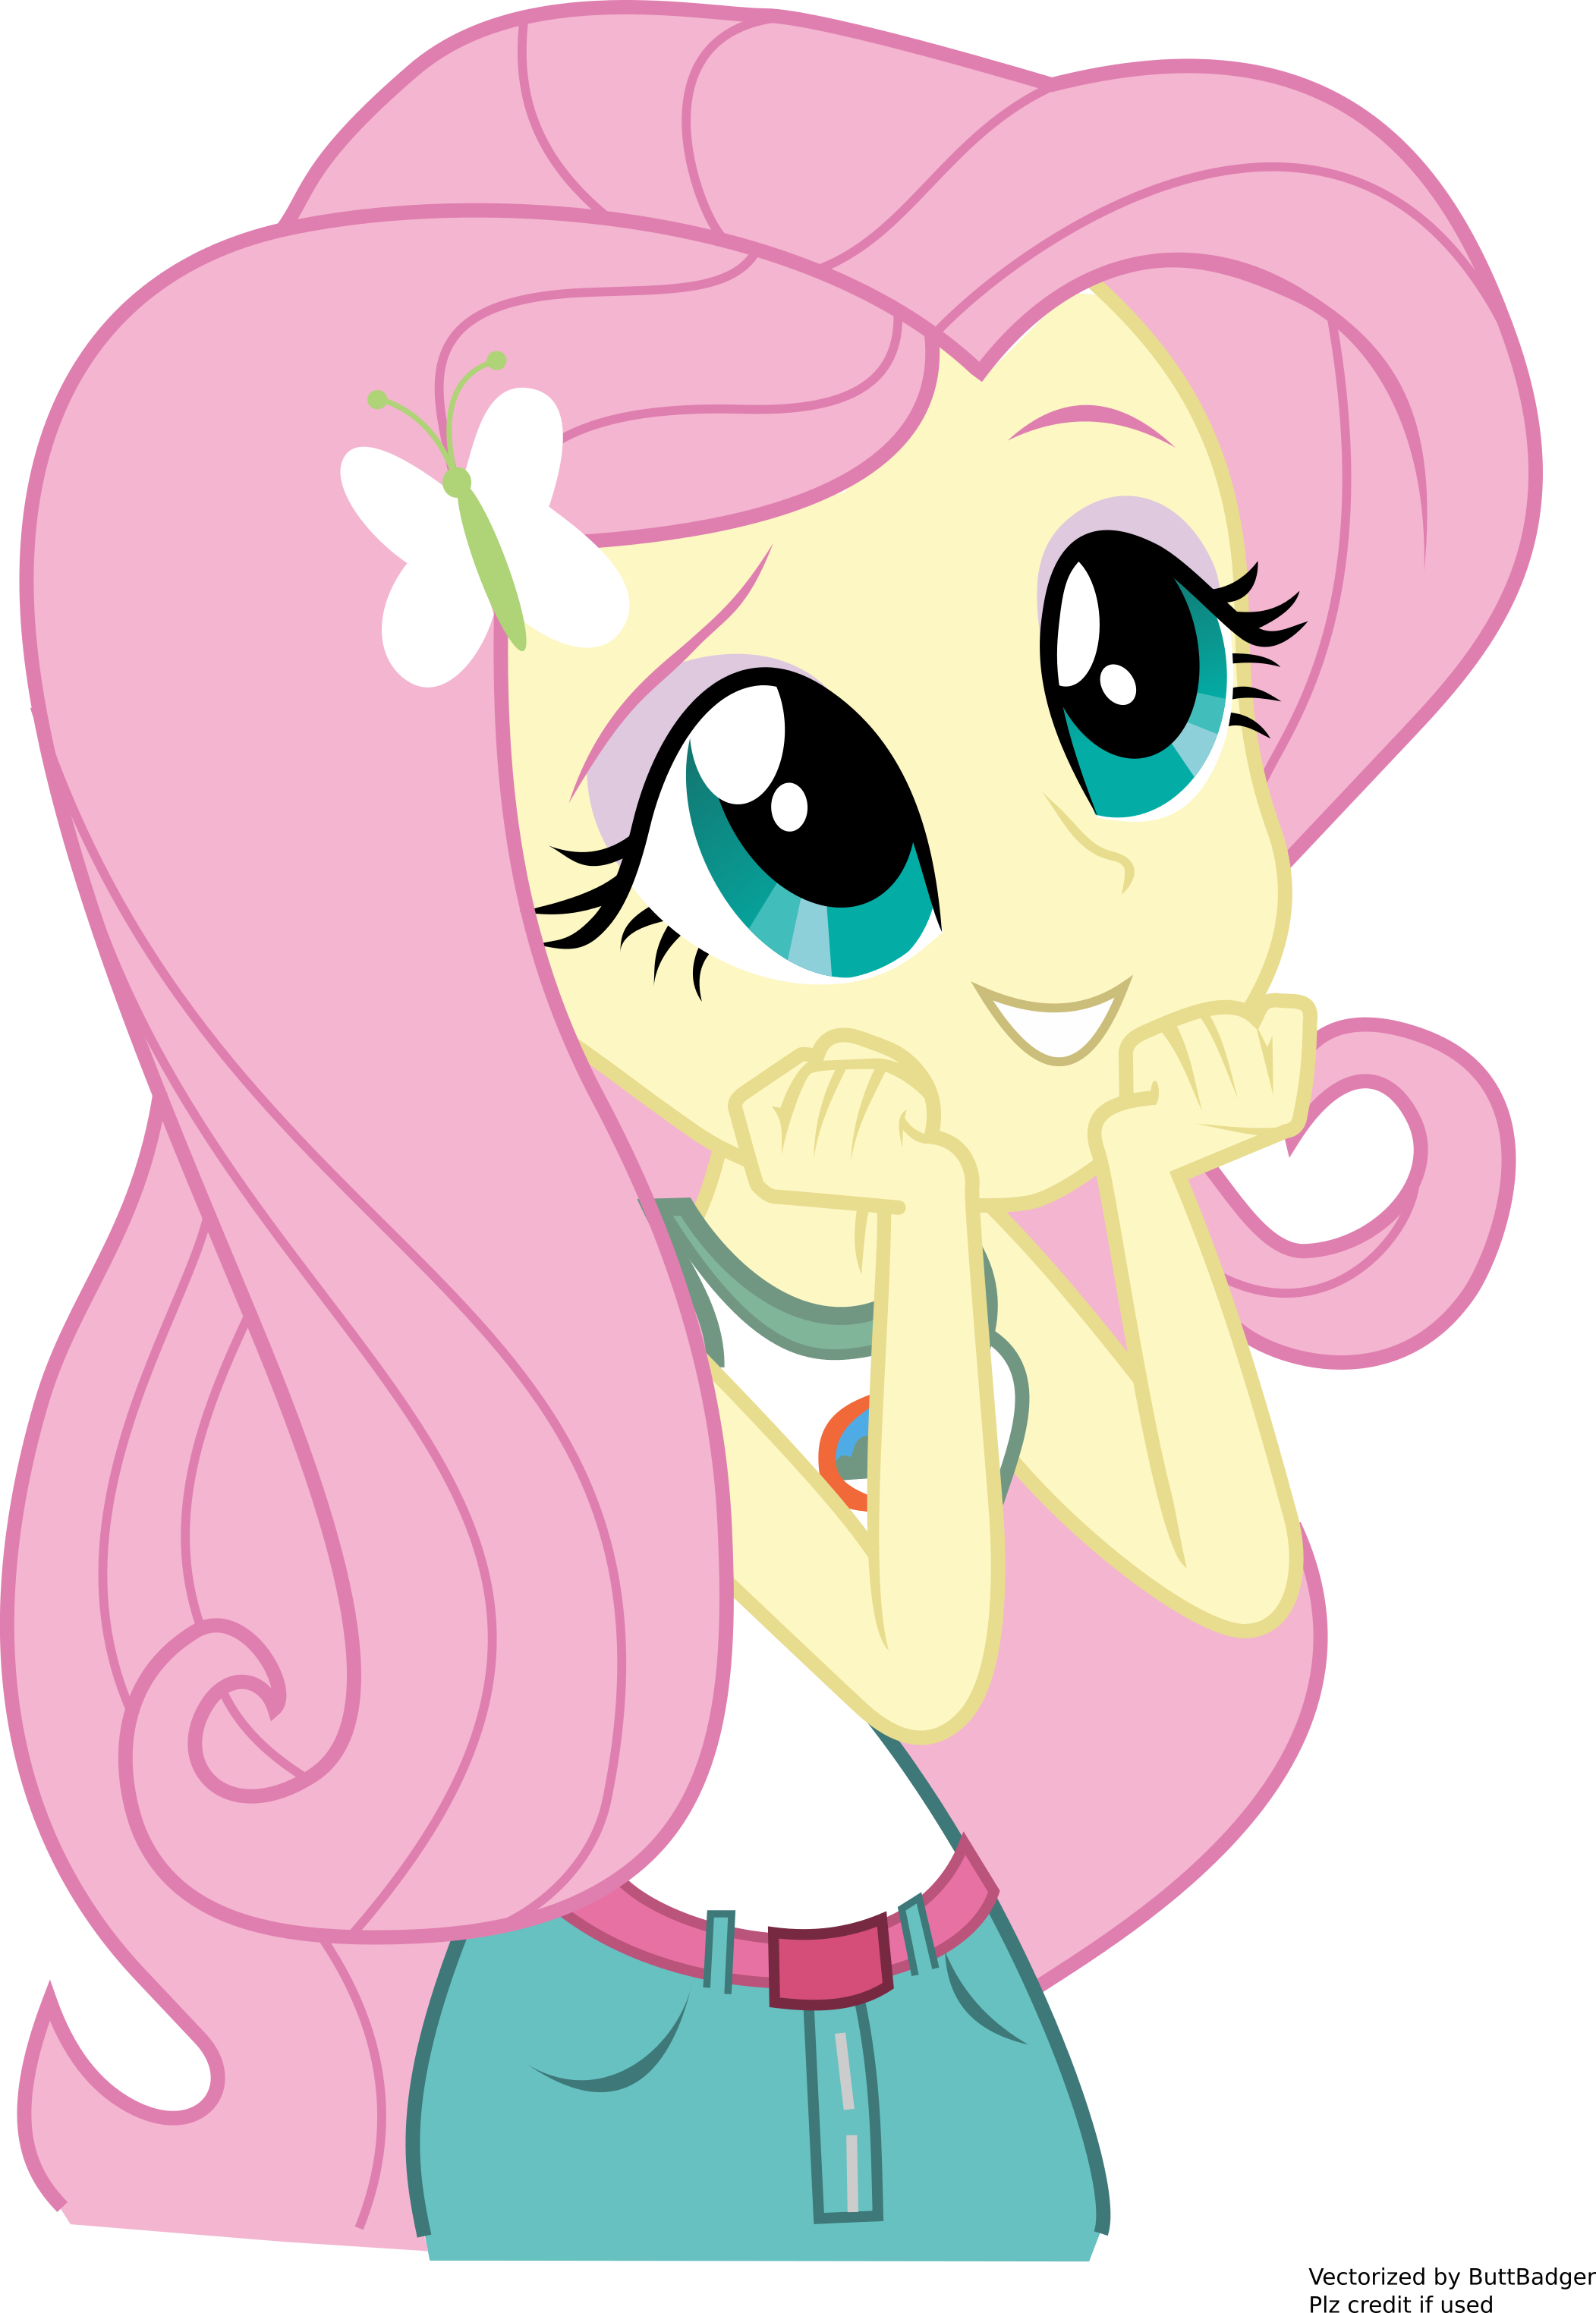 [SVG] Human Fluttershy from Legends of Everfree by maxlefou on DeviantArt